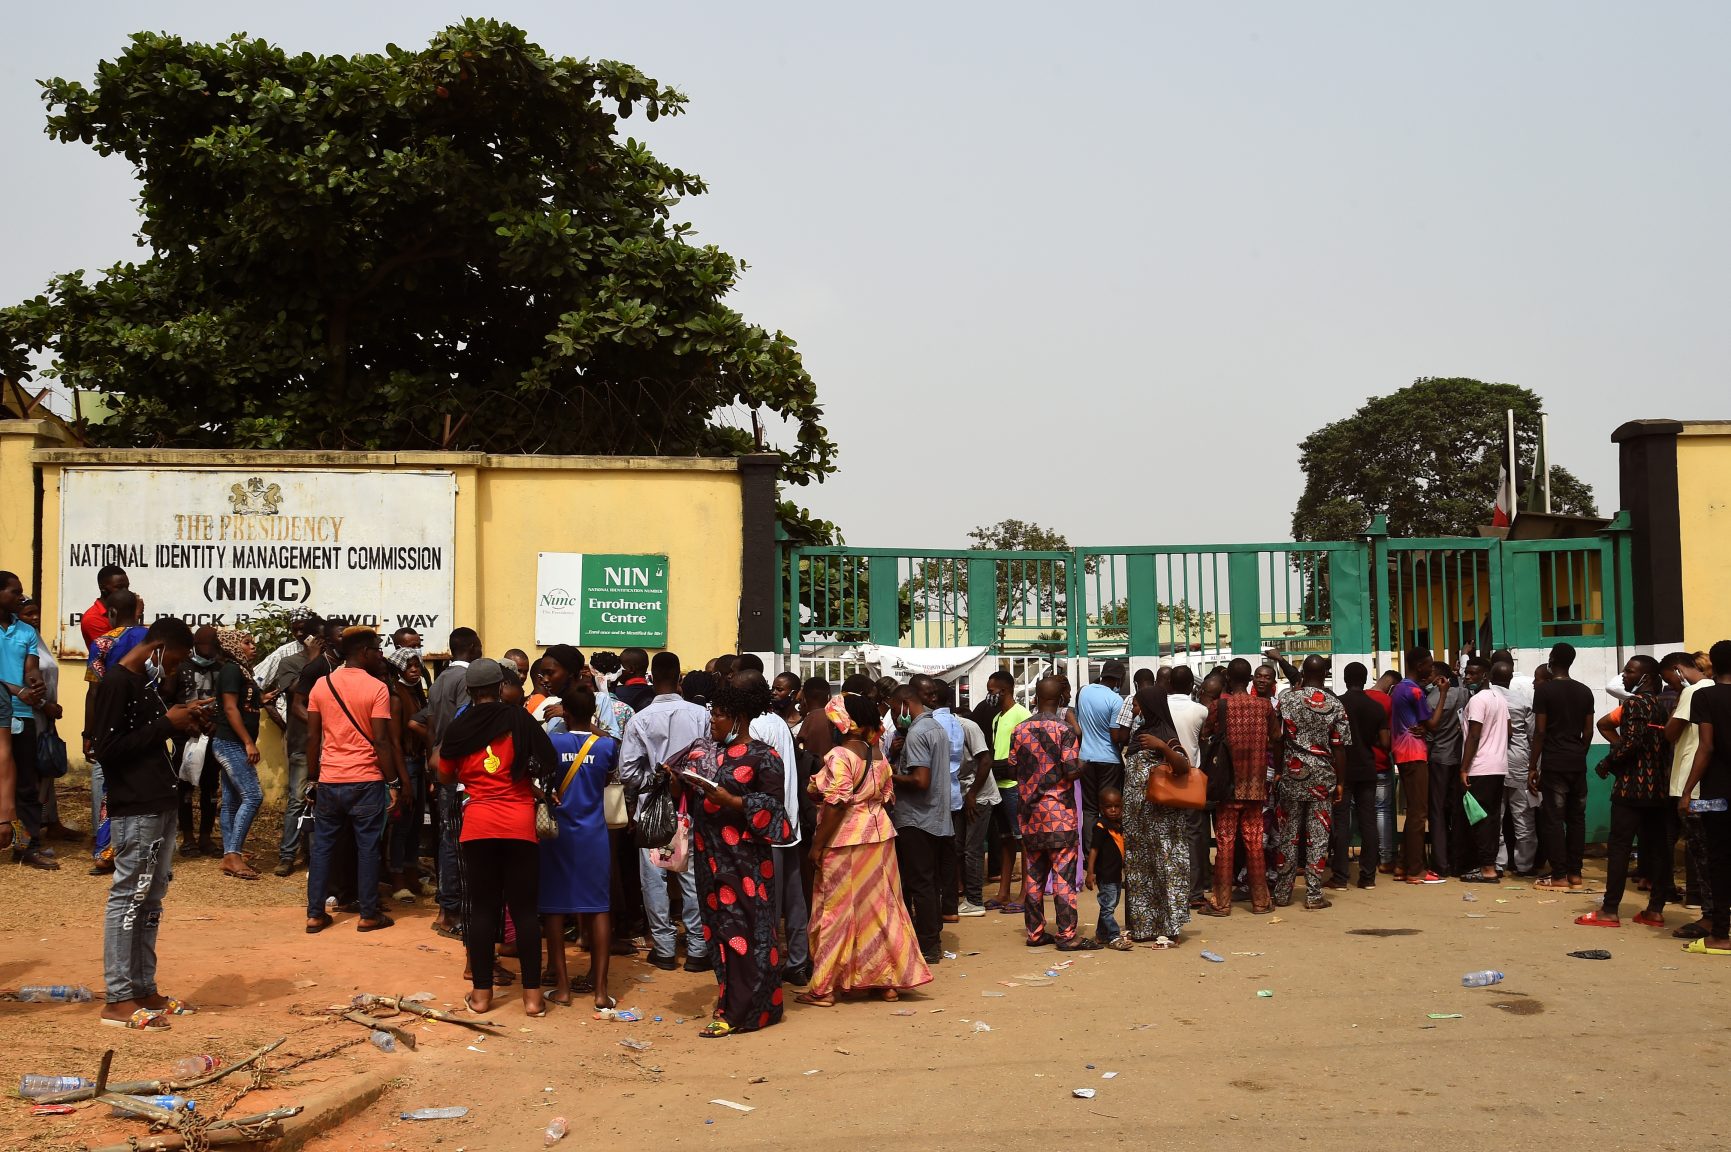 Applicants queue to obtain national identity numbers at the National Identity Management Commission (NIMC) office, in the Lagos state capital of Ikeja, on December 30, 2020